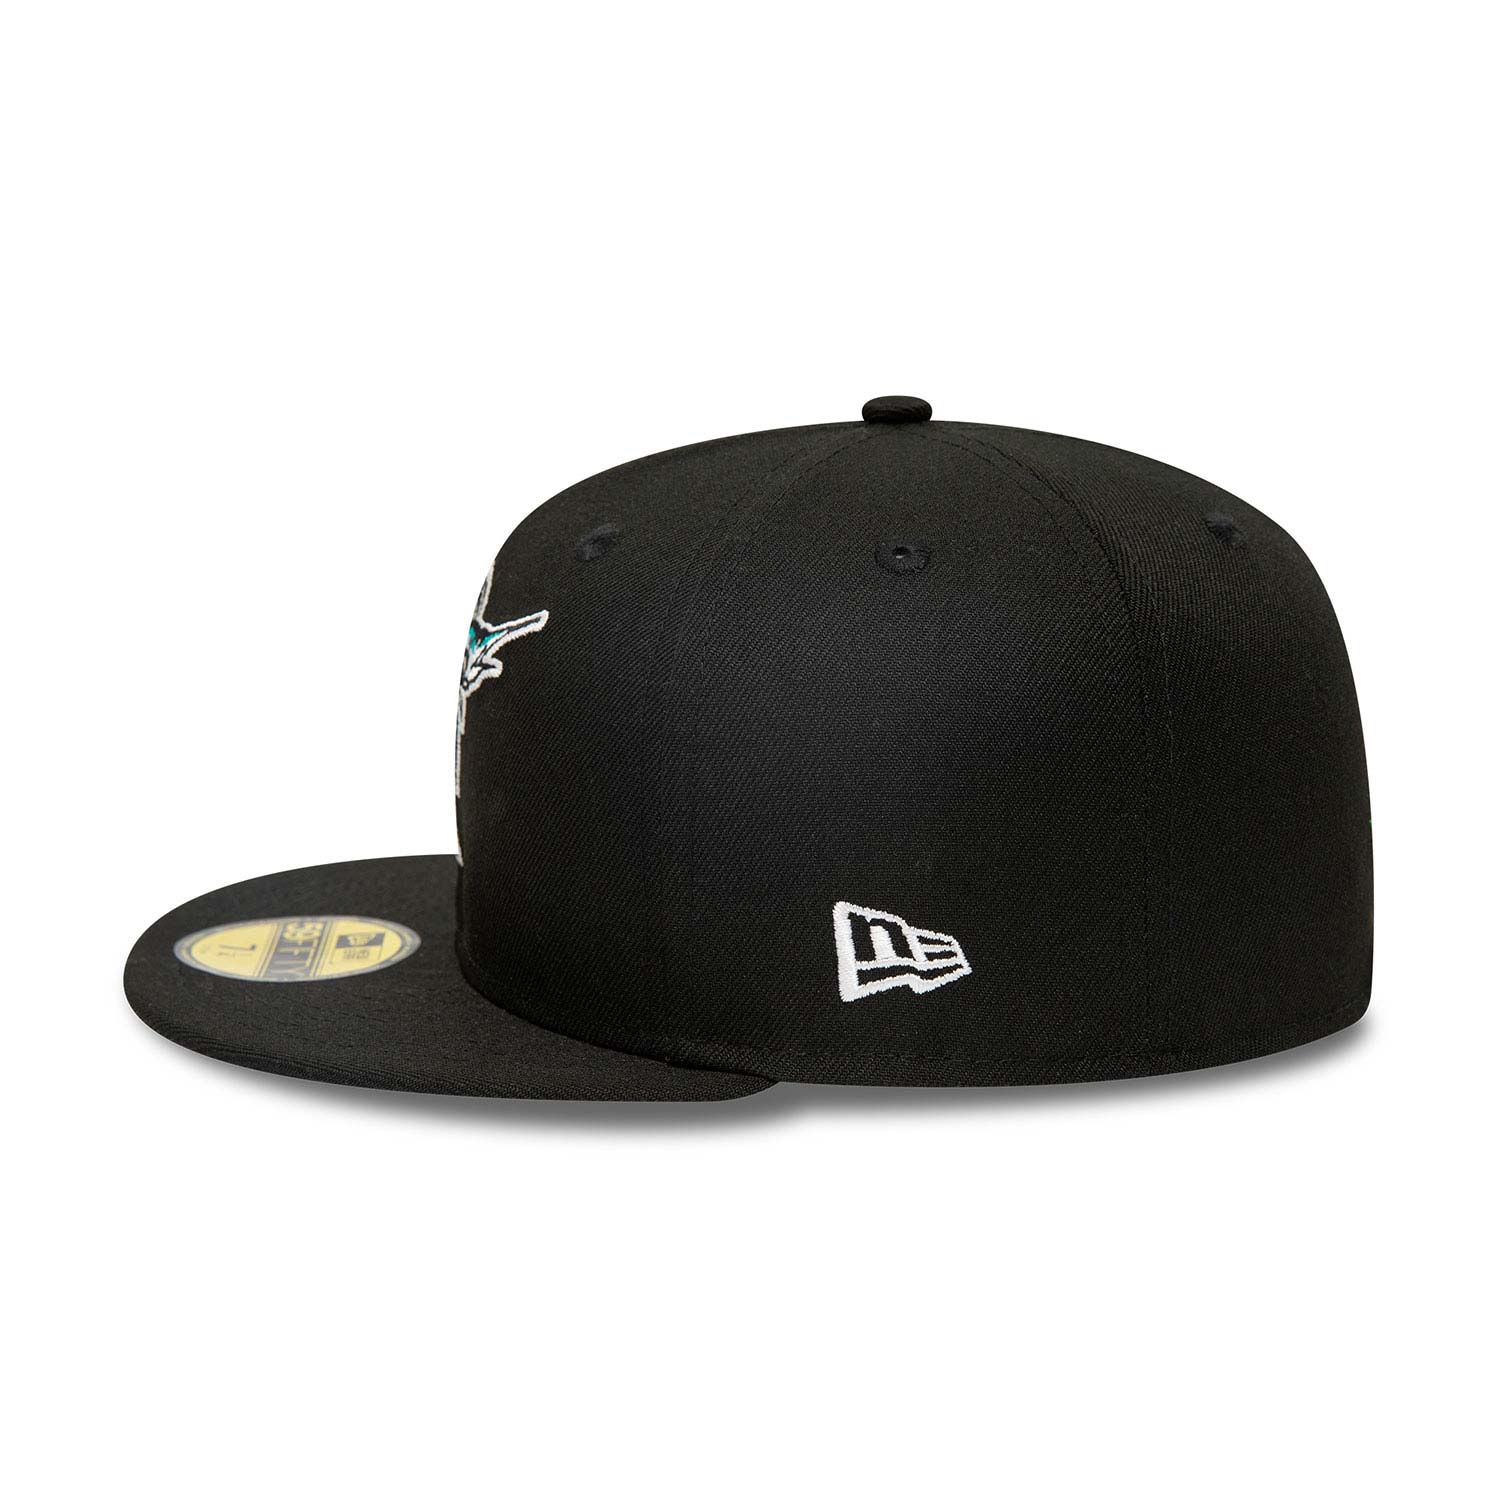 Miami Marlins Stateview Black 59FIFTY Fitted Cap